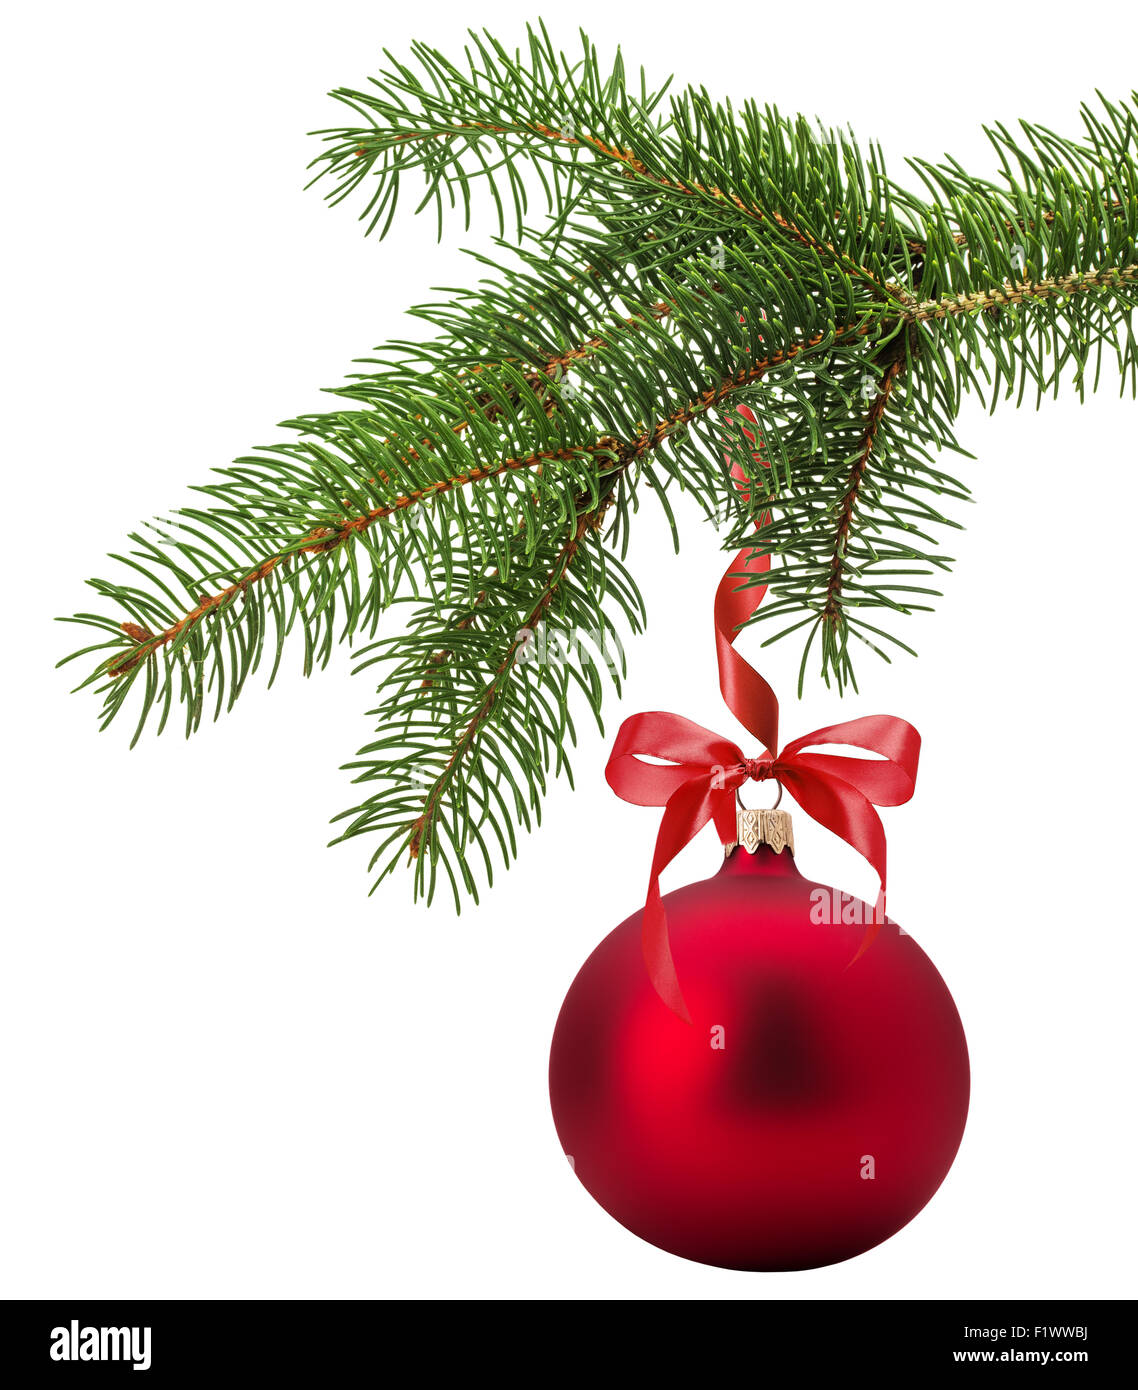 Christmas tree branch with red ball isolated on the white background. Stock Photo